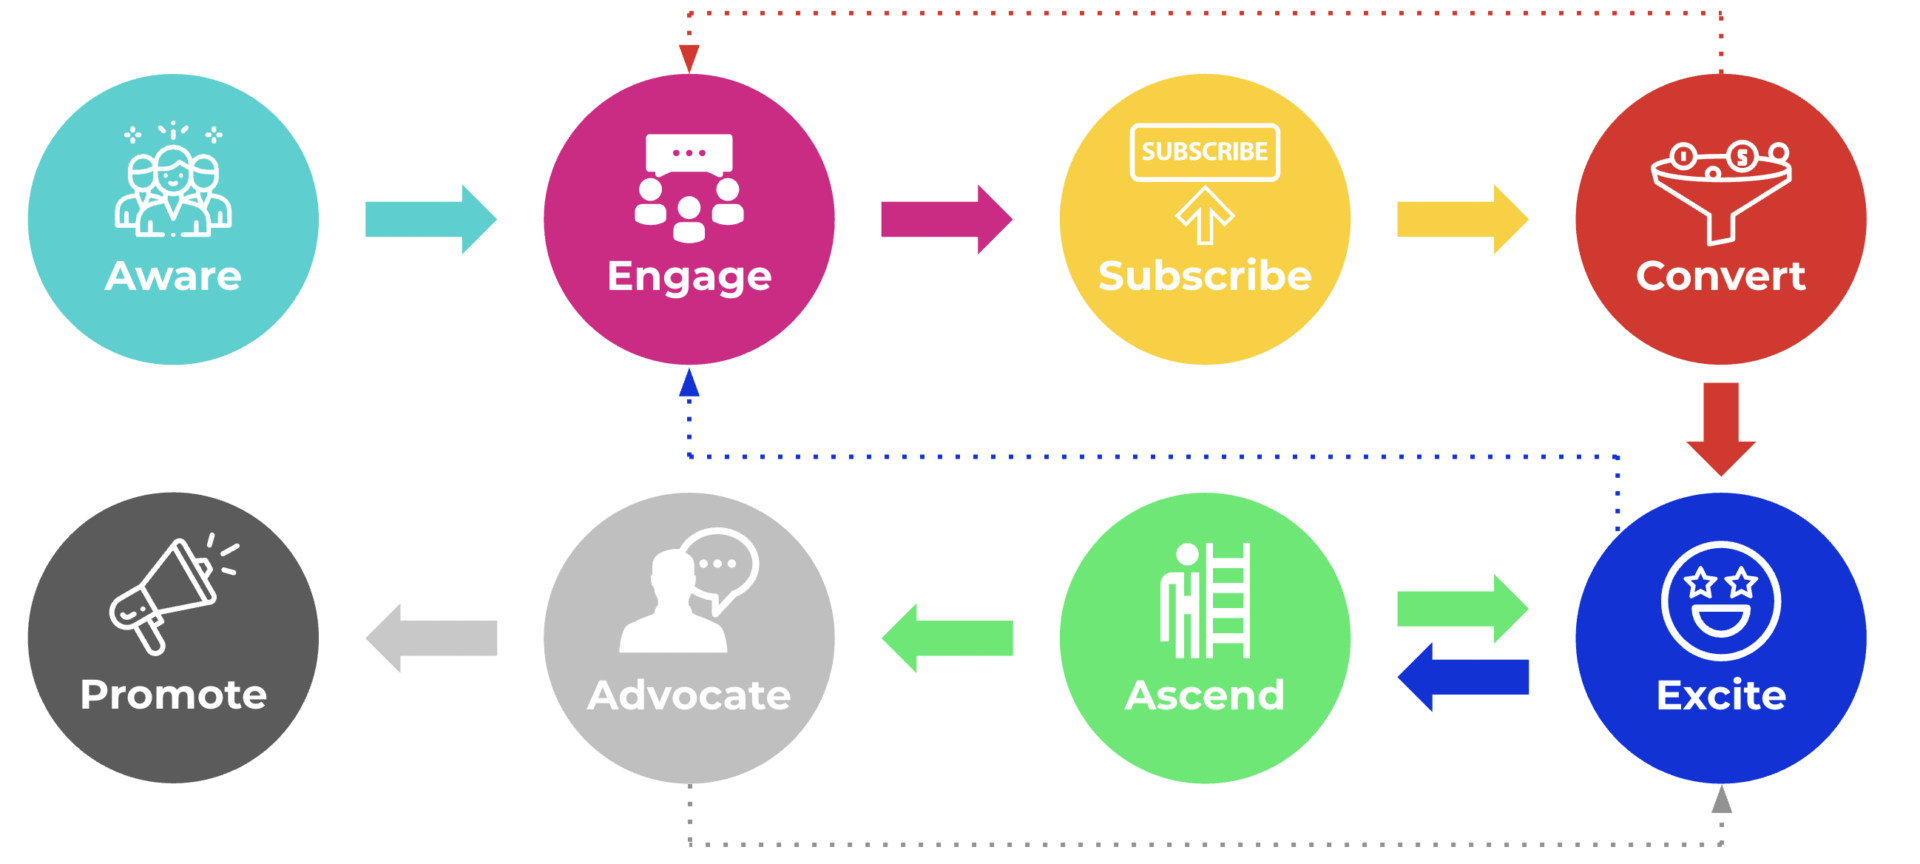 Flow of email marketing and the tasks involved in that flow